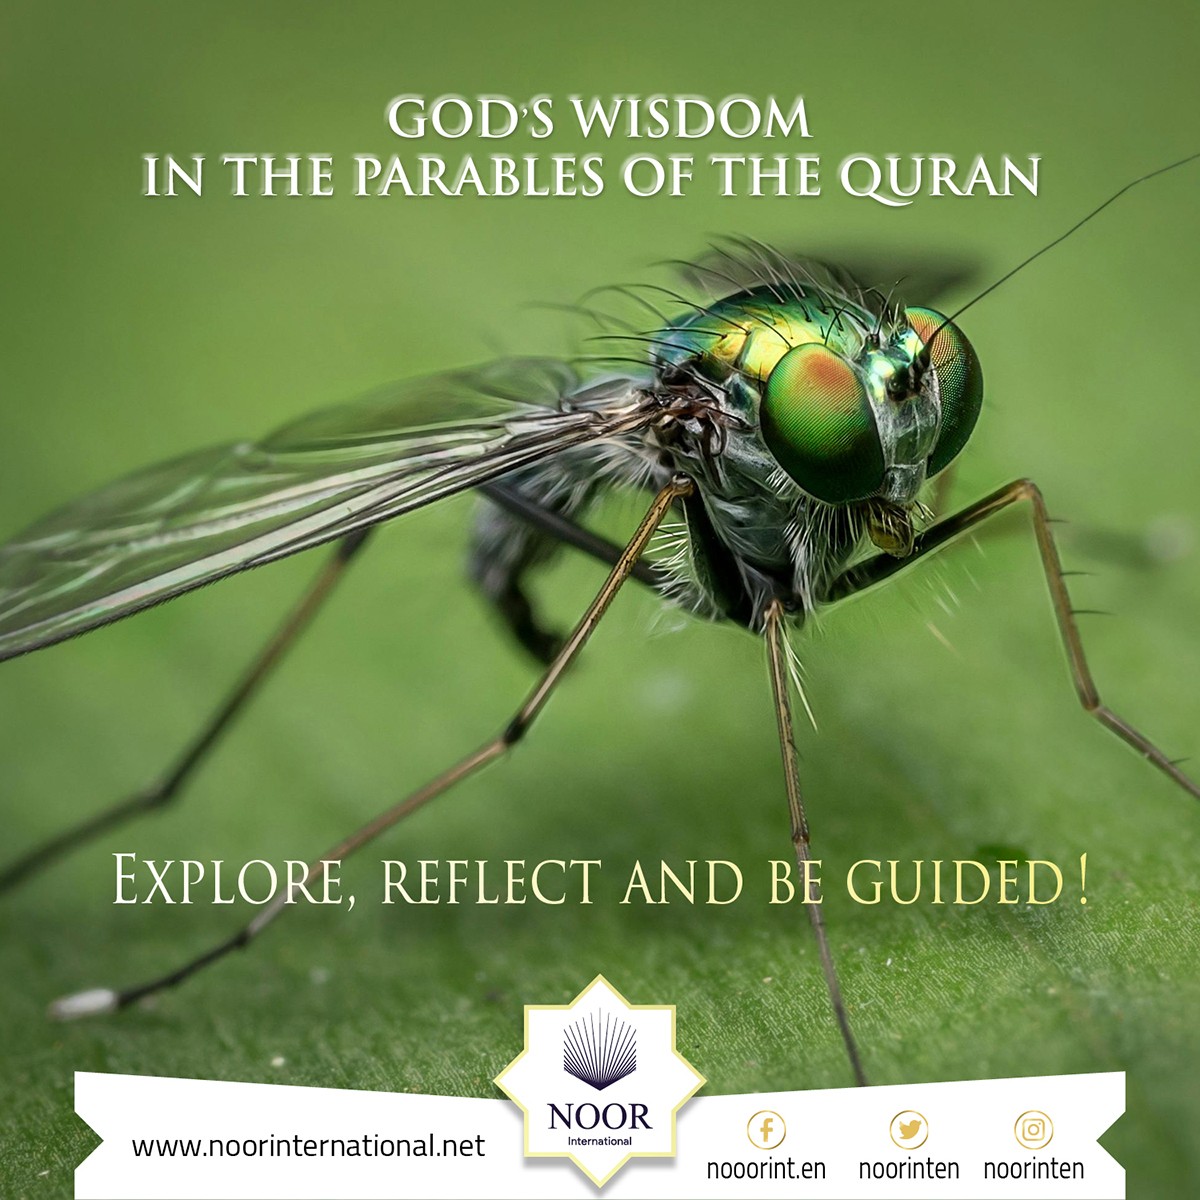 God's wisdom in the parables of the Quran: Explore, reflect, and be guided."